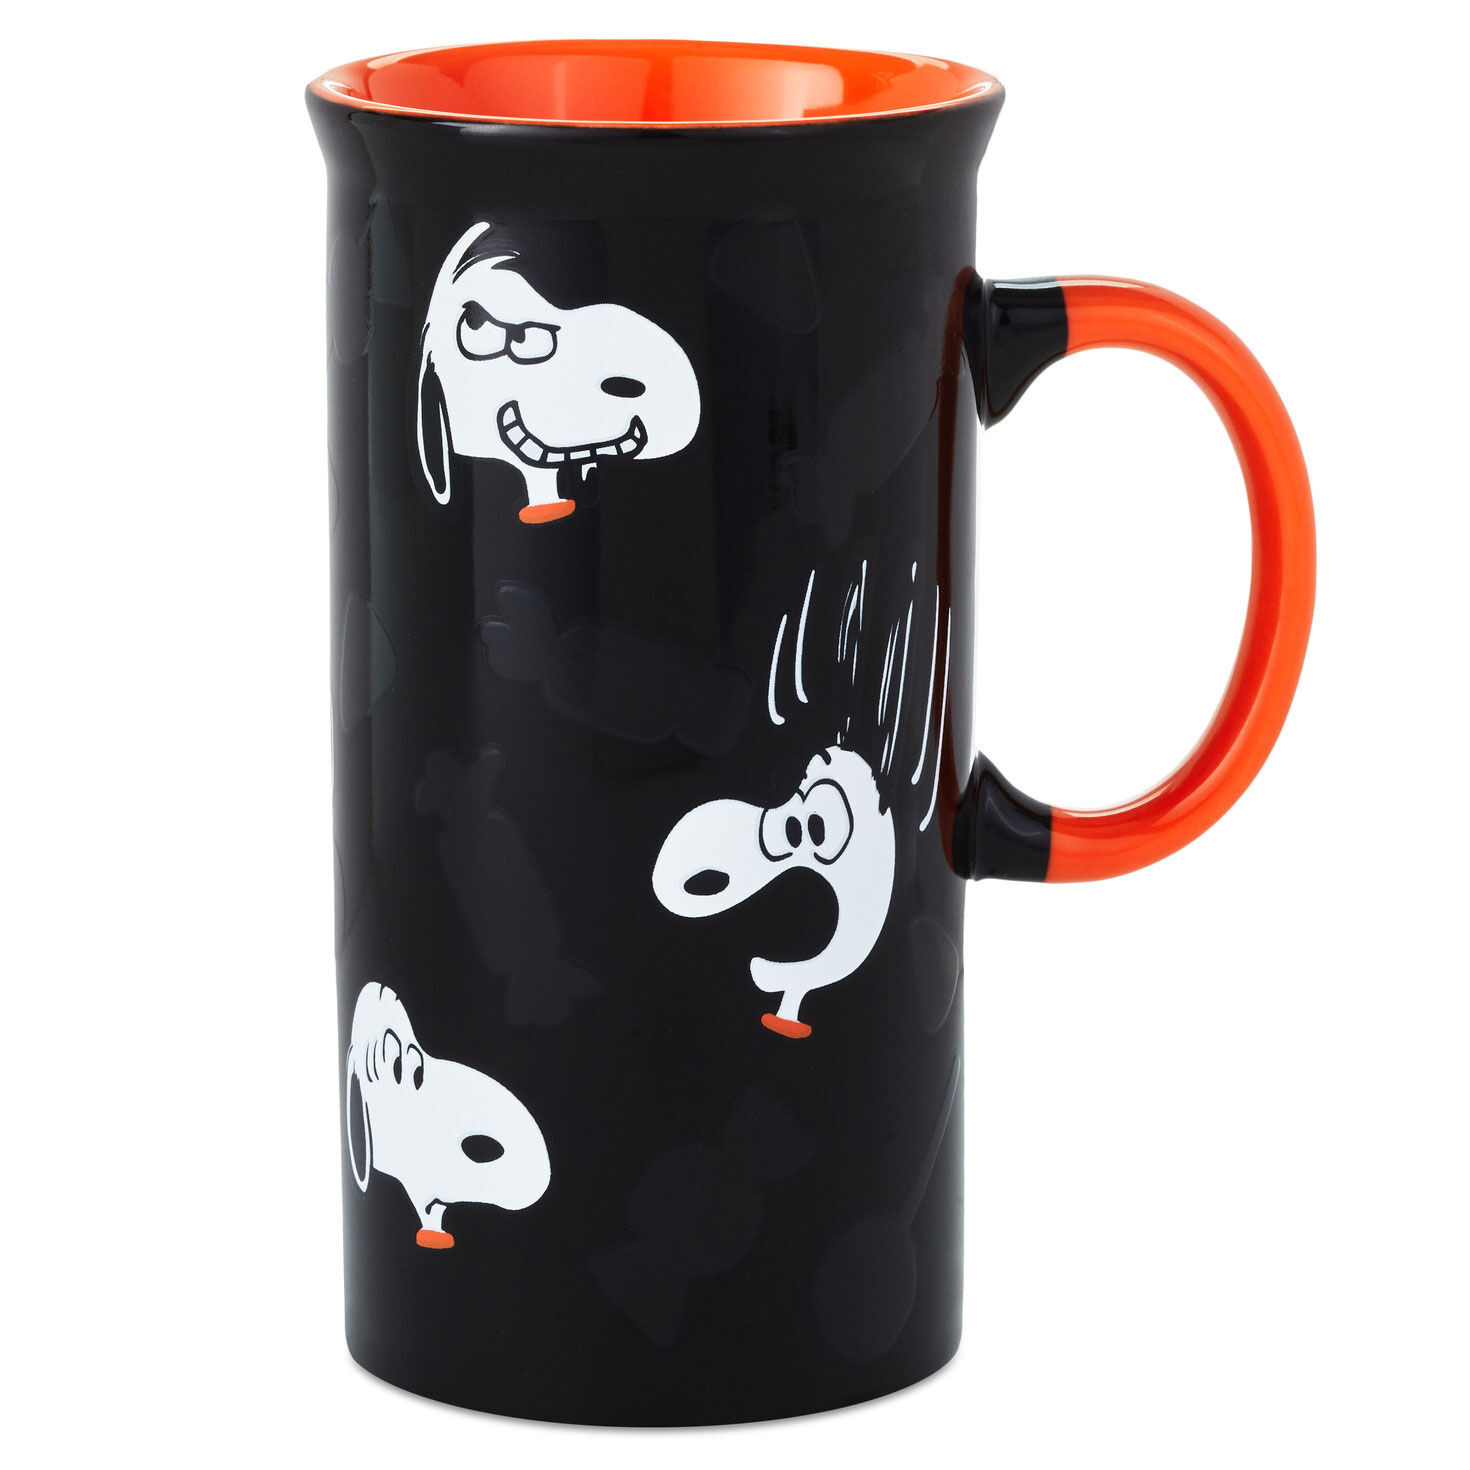 COFFEE MUG "MERRY and Bright" SNOOPY PLASTIC 16 oz PEANUTS SNOOPY TRAVEL CUPS 